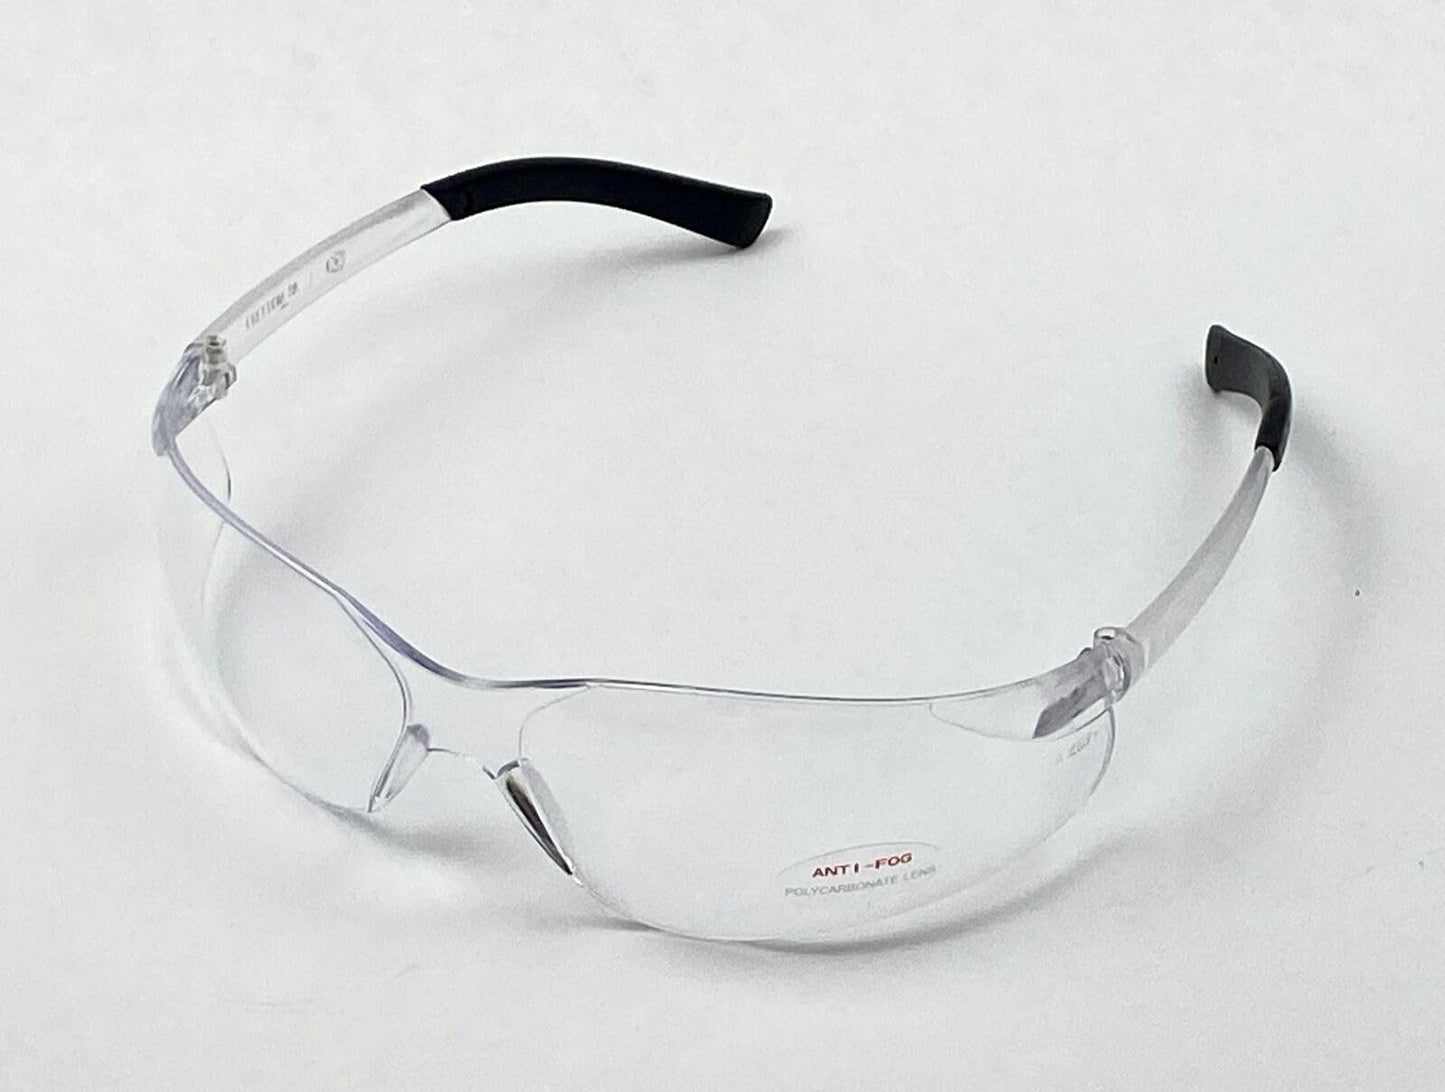 CHAOS Moto Slicks Anti-Fog ANSI Z87.1+ Safety Glasses - Superior Fit, Maximum Protection, Crystal-Clear Vision